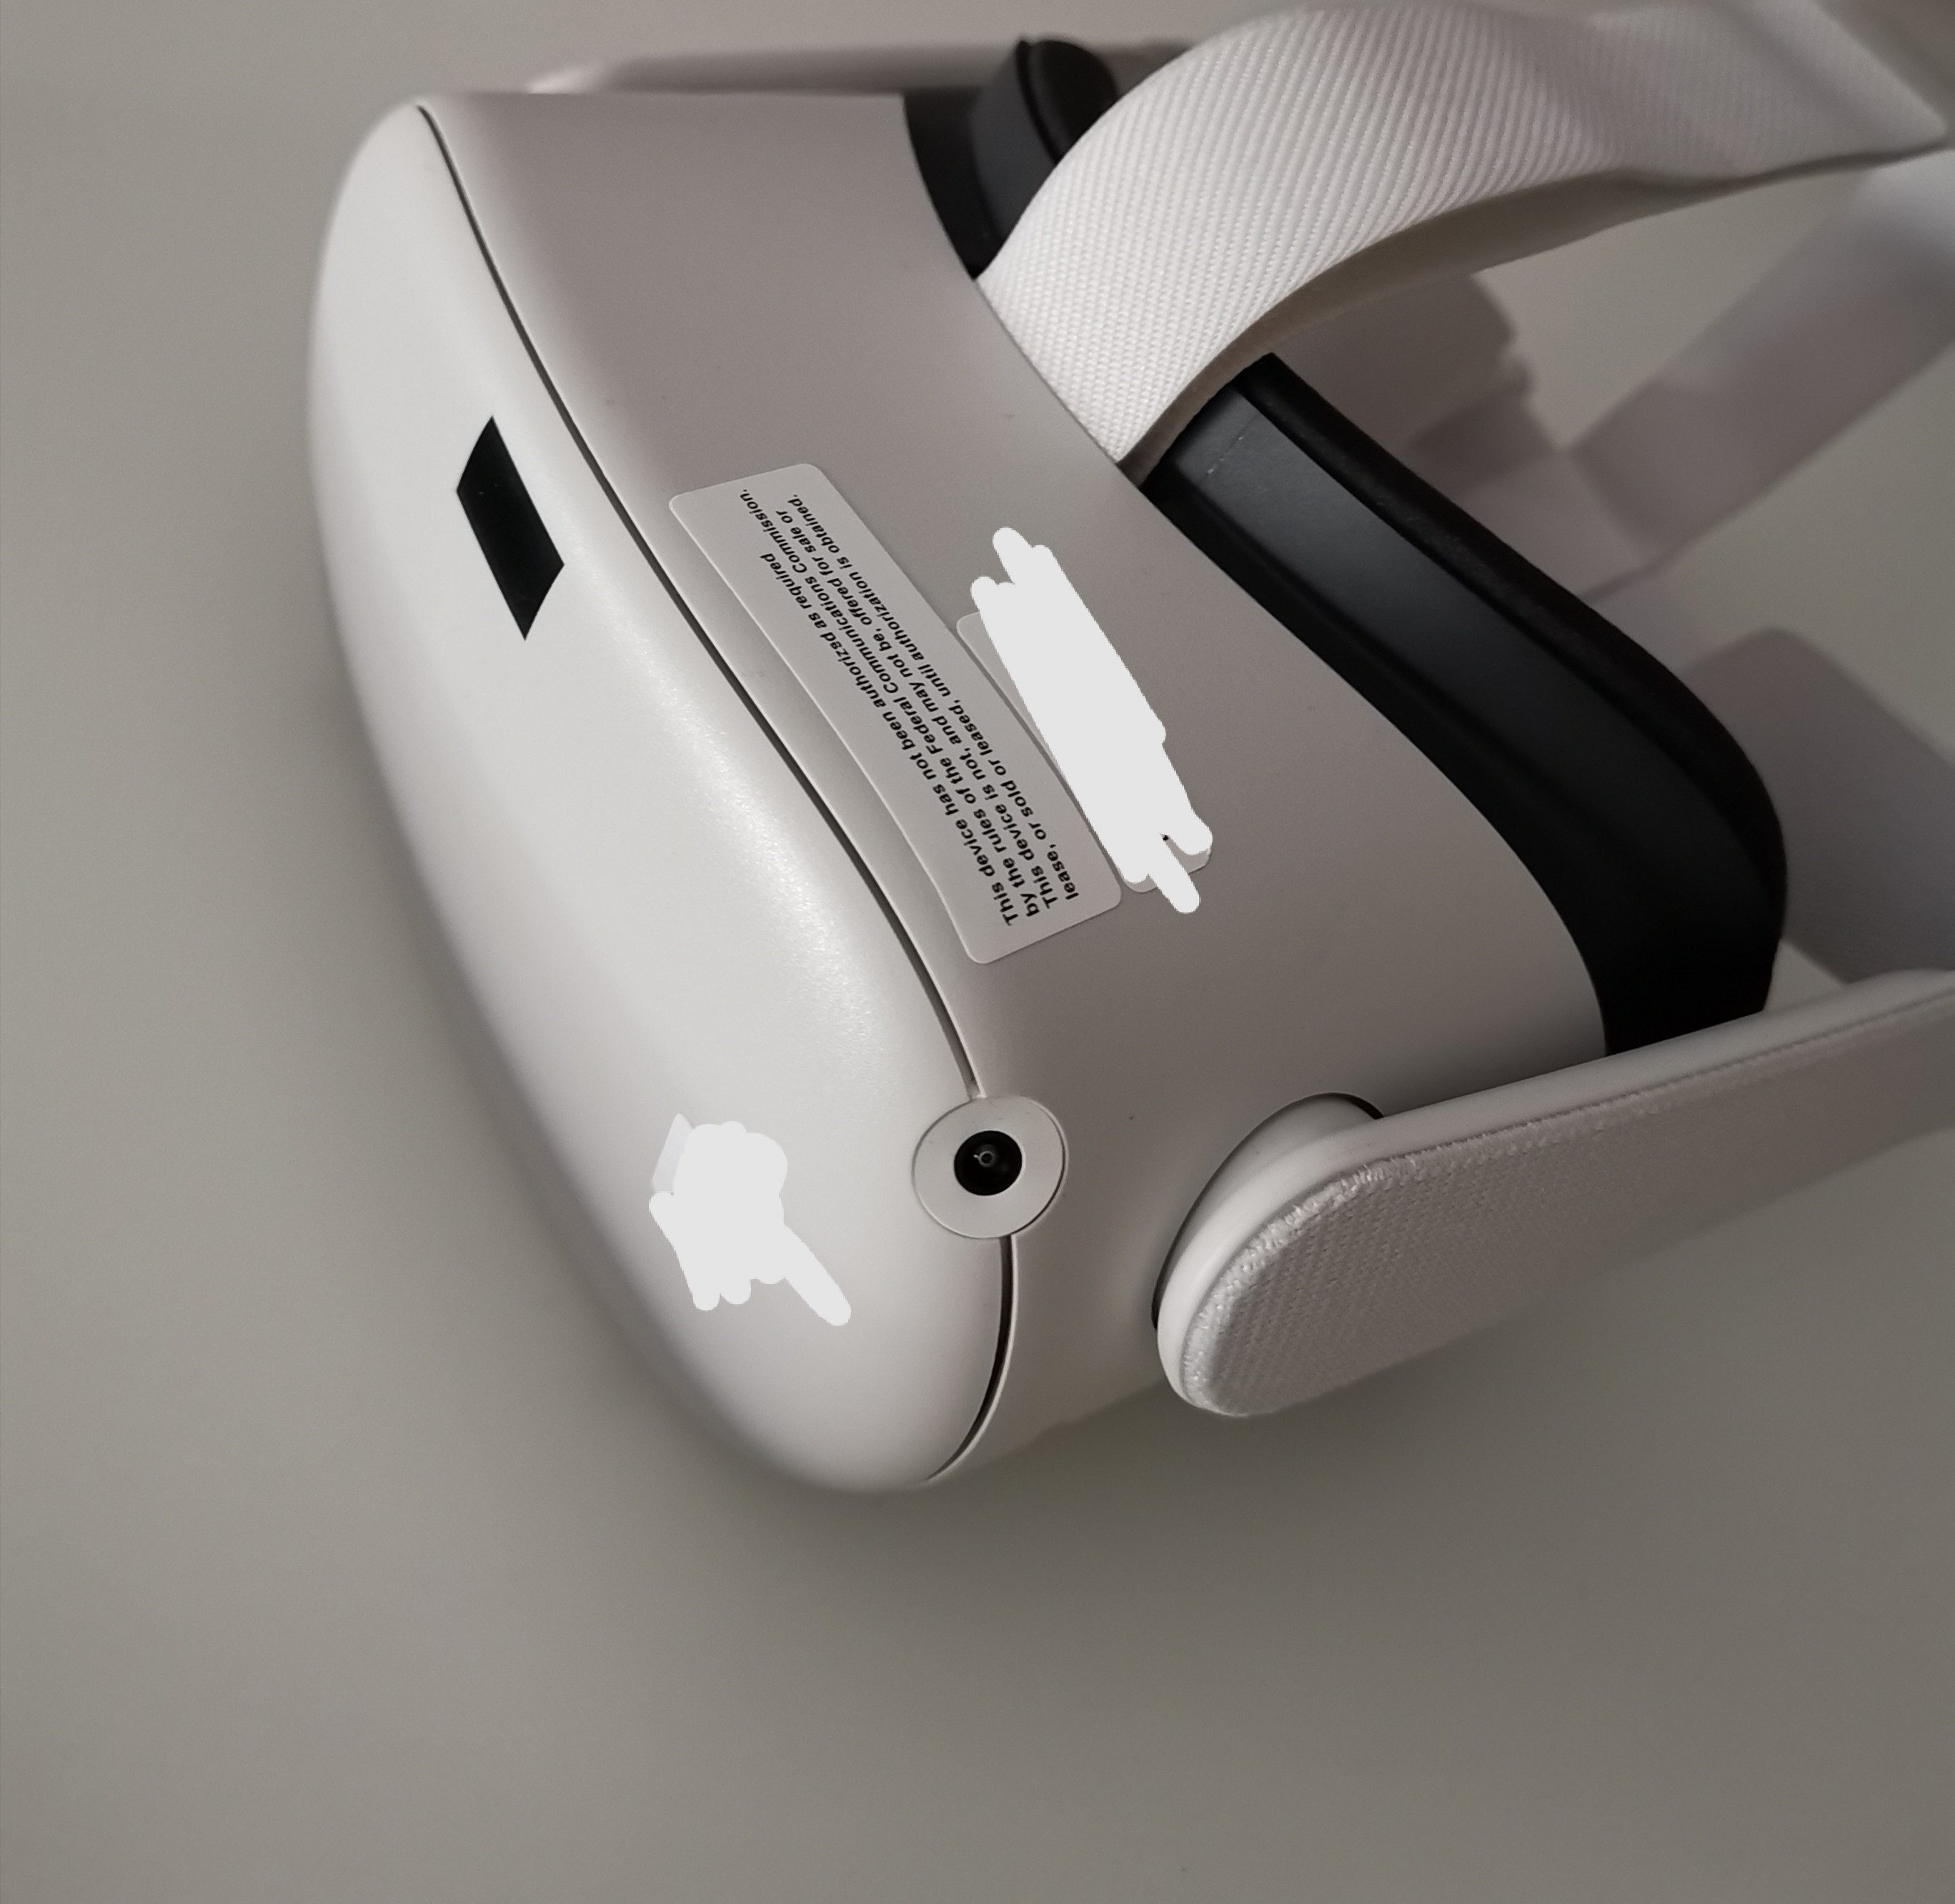 Leaked Photo Shows Oculus Quest 2 with Headset & Controller Tweaks